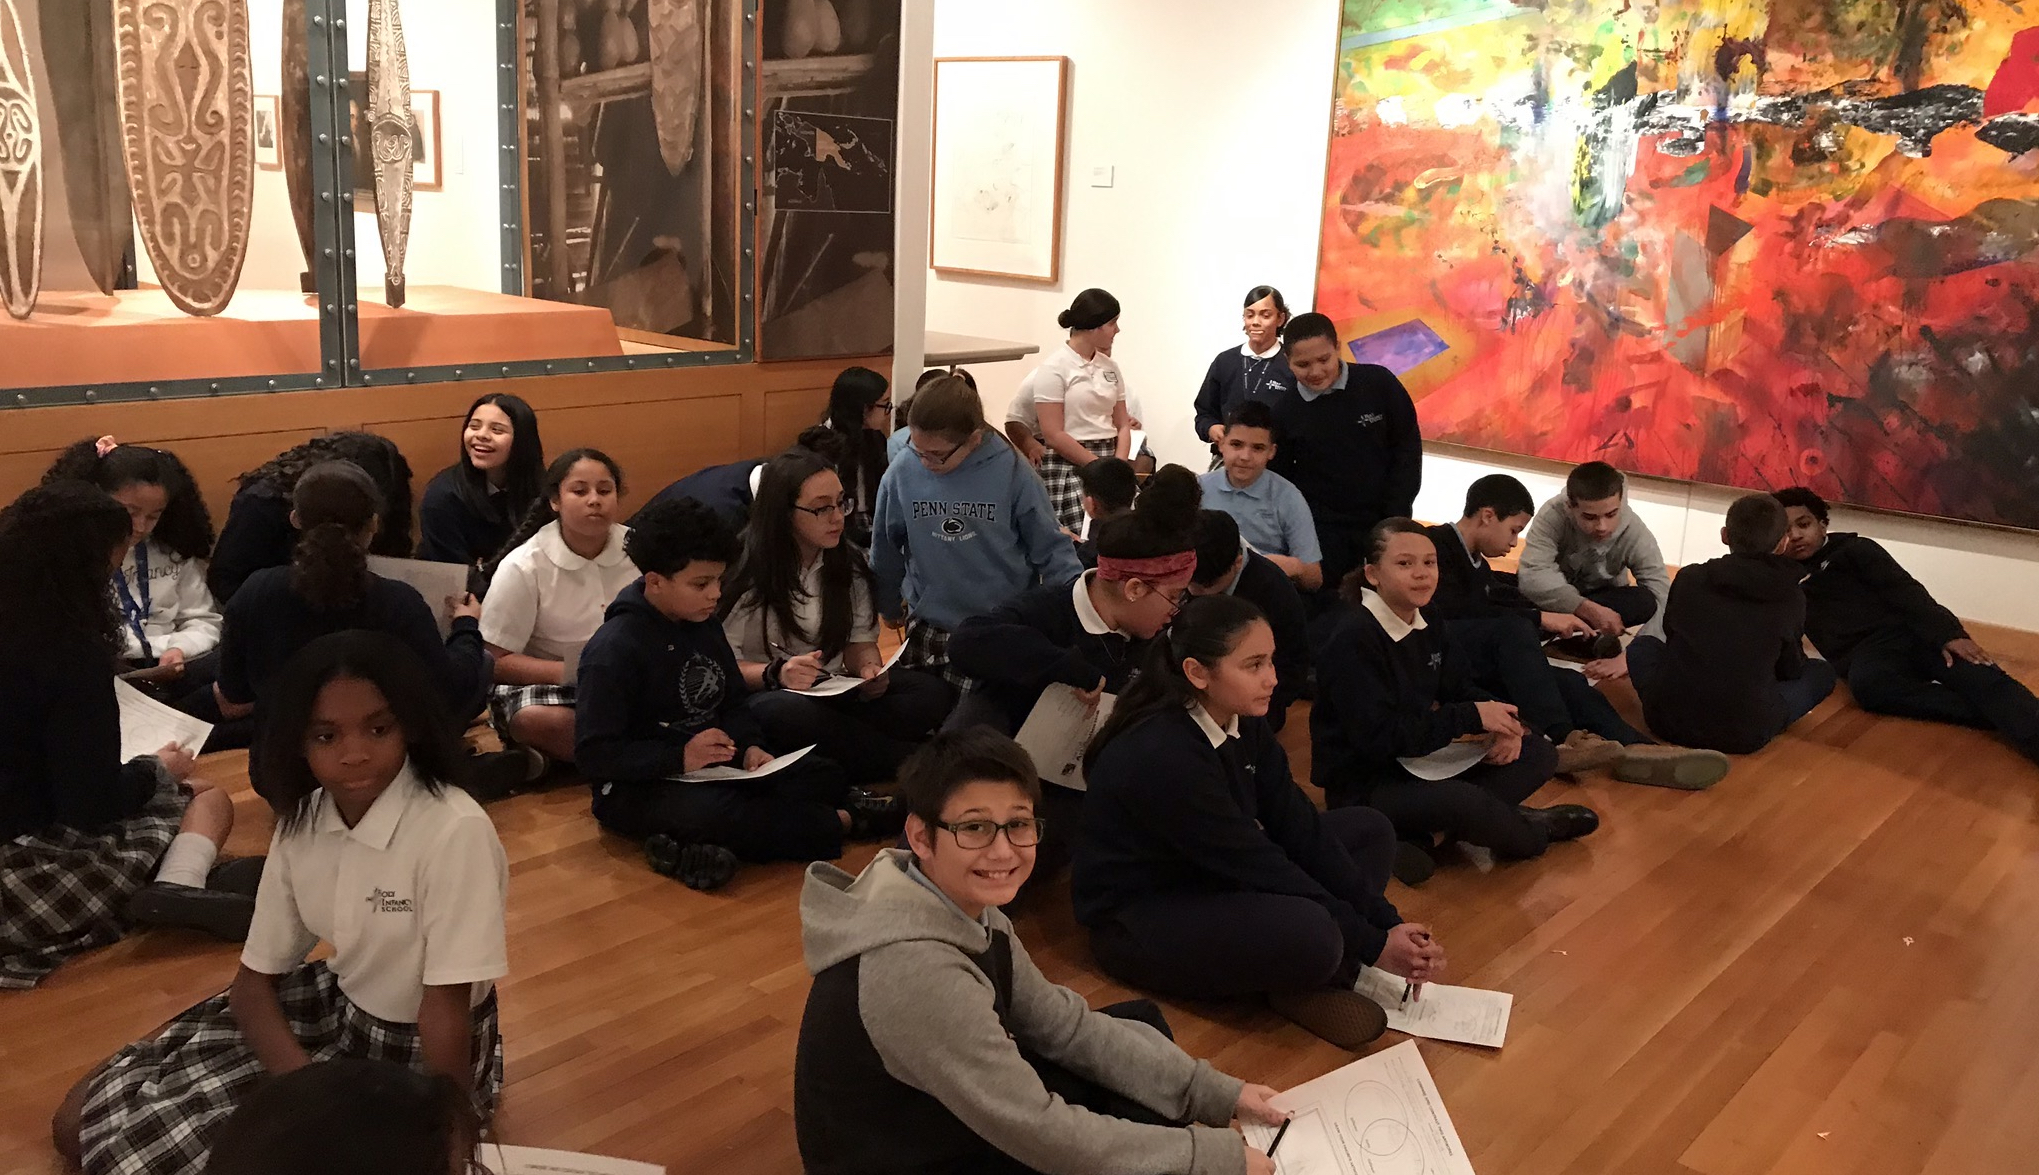 Students from Holy Infancy School explore the galleries